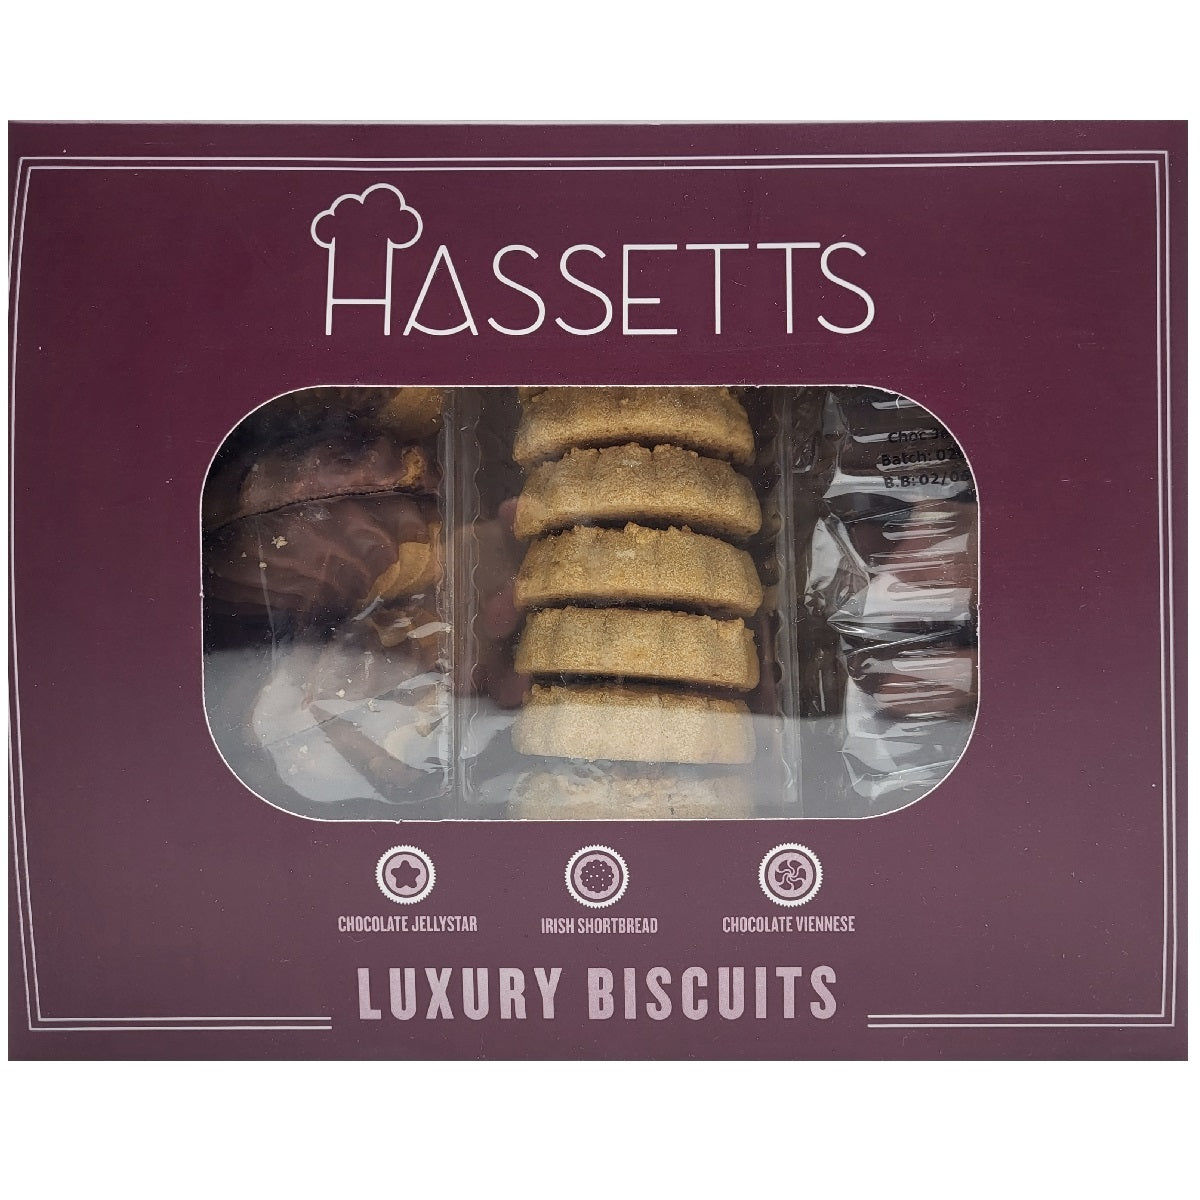 Hassetts Luxury Biscuits 470g